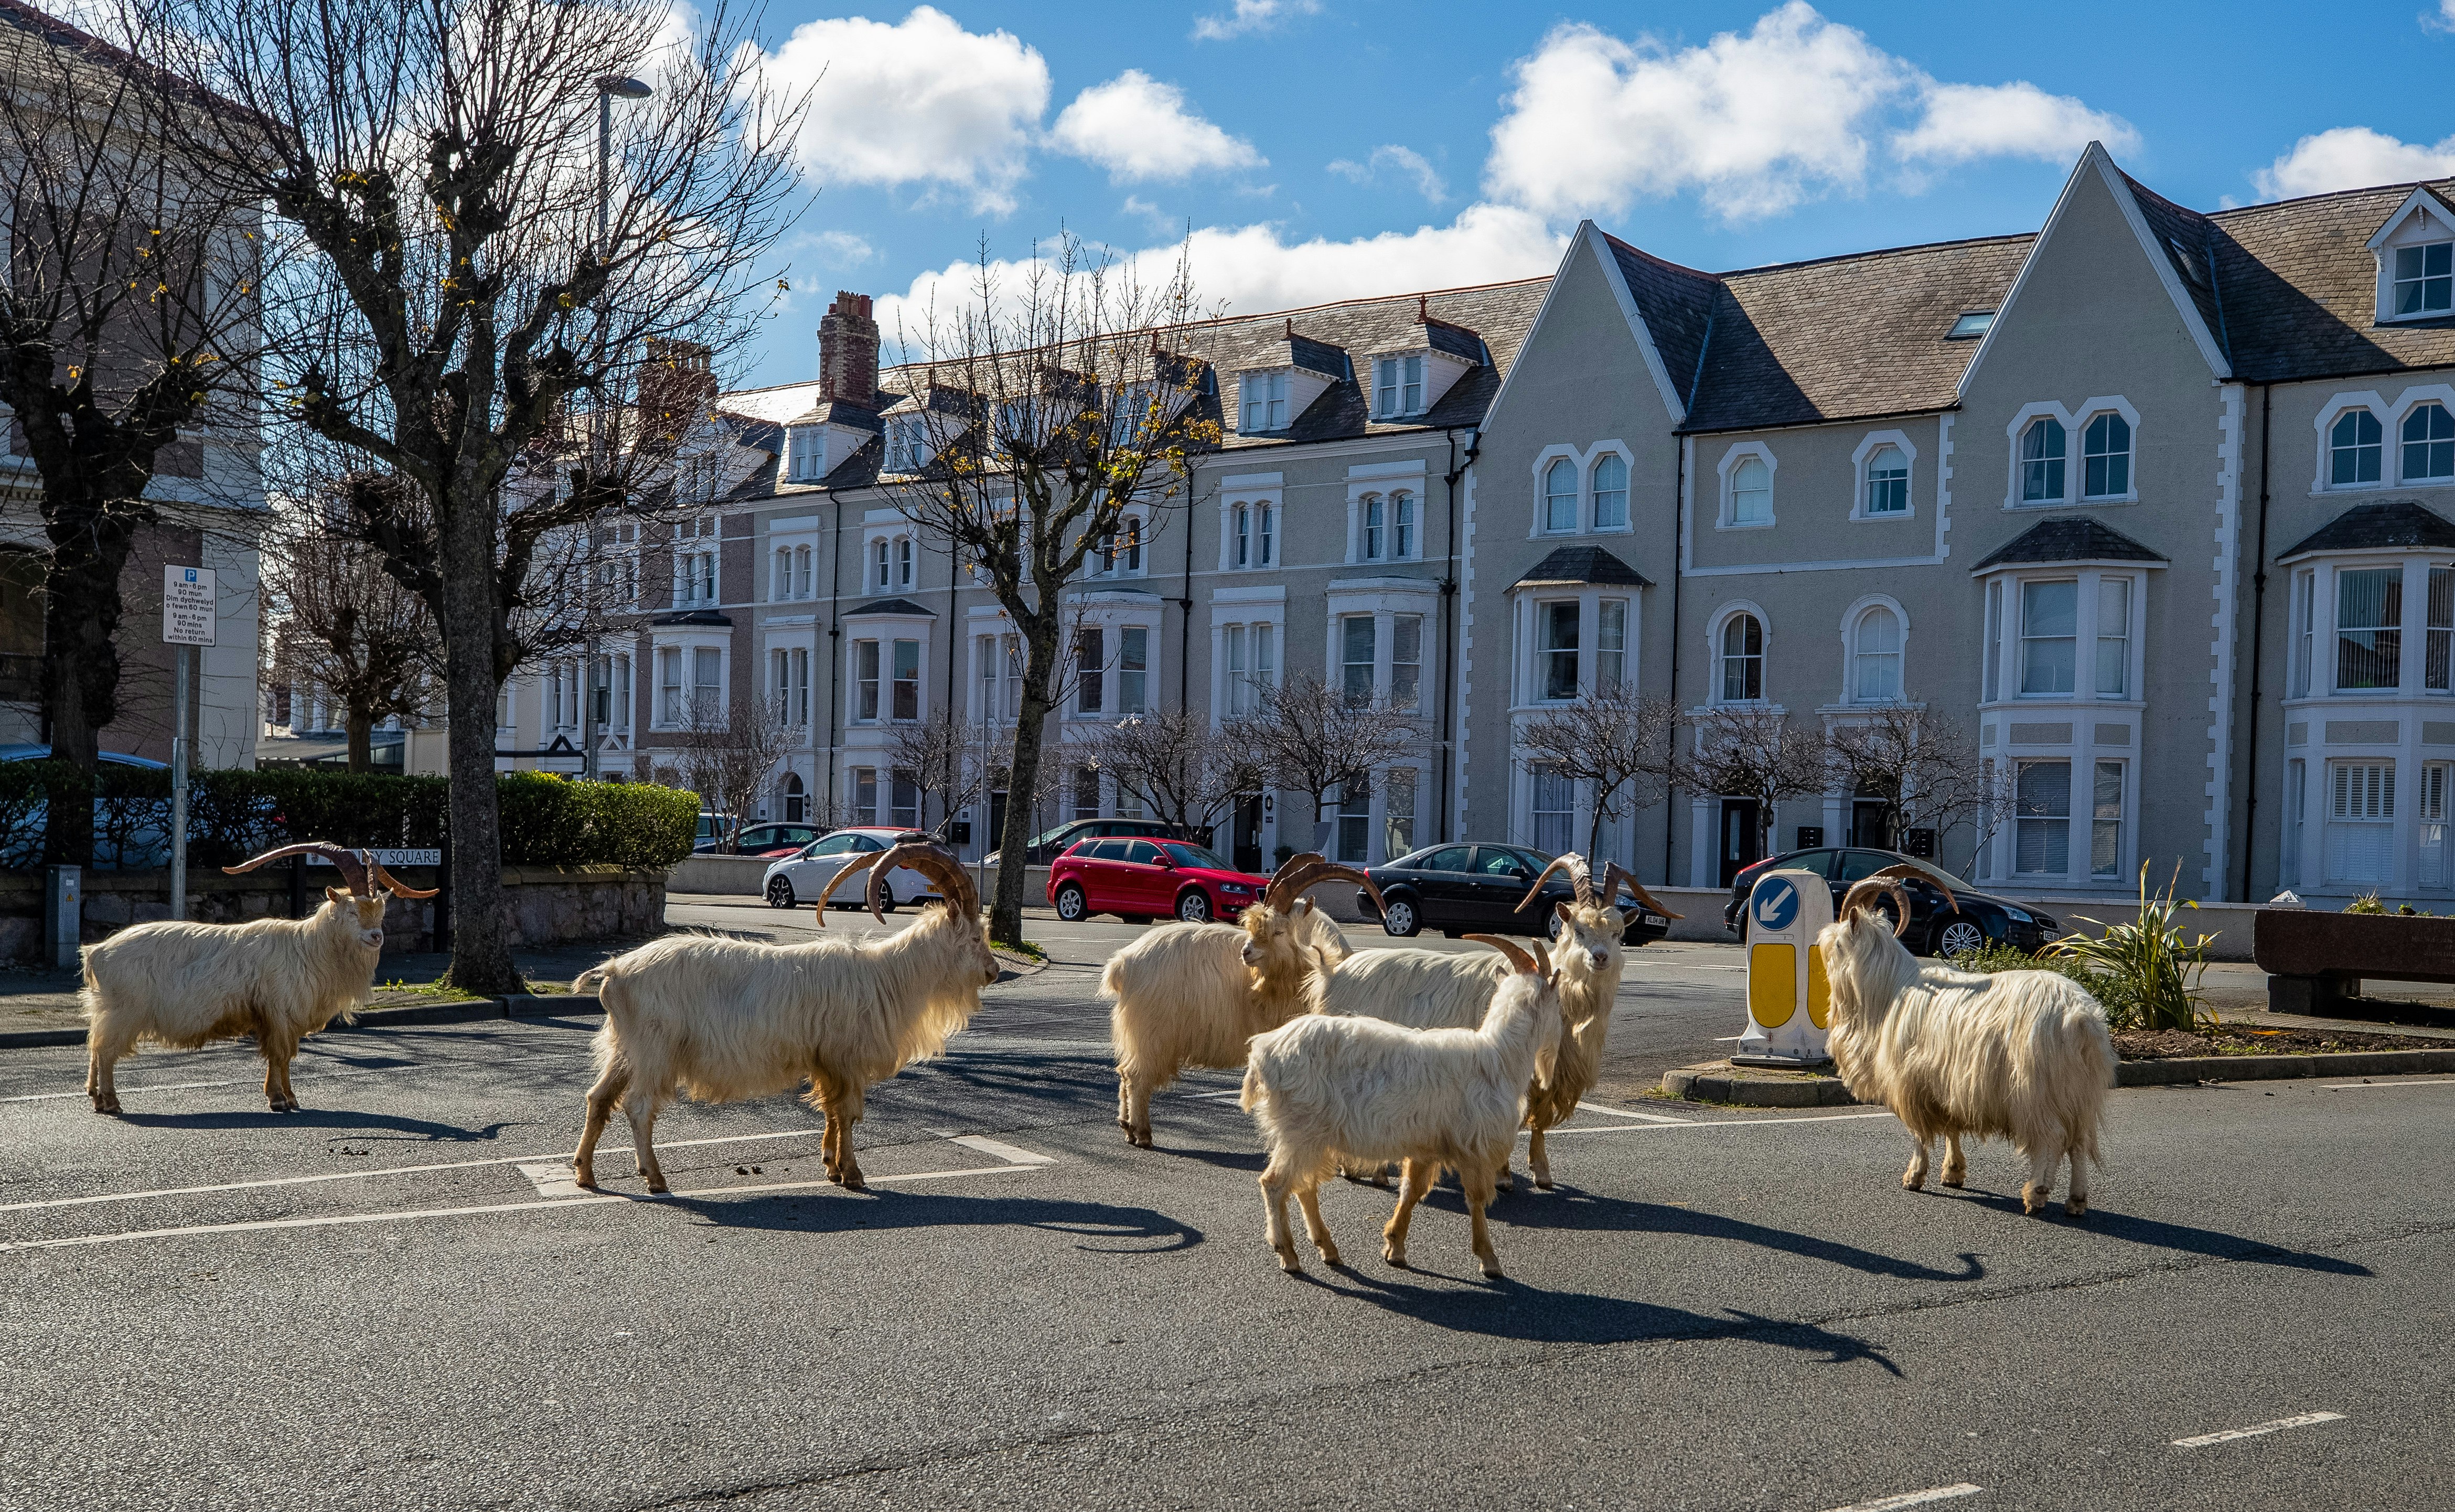 A herd of goats take advantage of quiet streets in Llandudno, north Wales